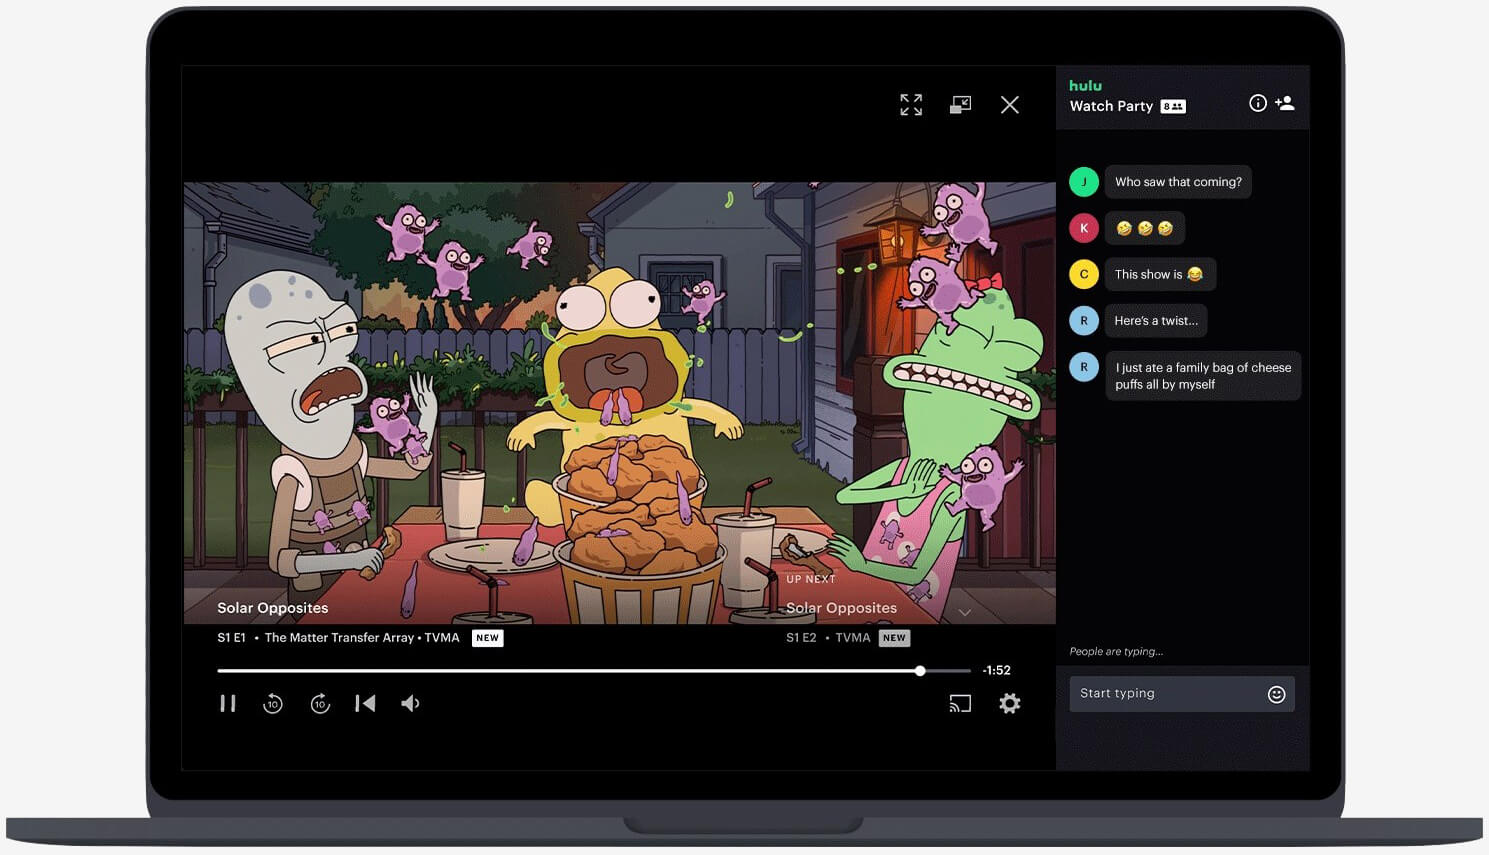 Hulu's Watch Party lets you co-view TV shows and movies in groups of up to eight